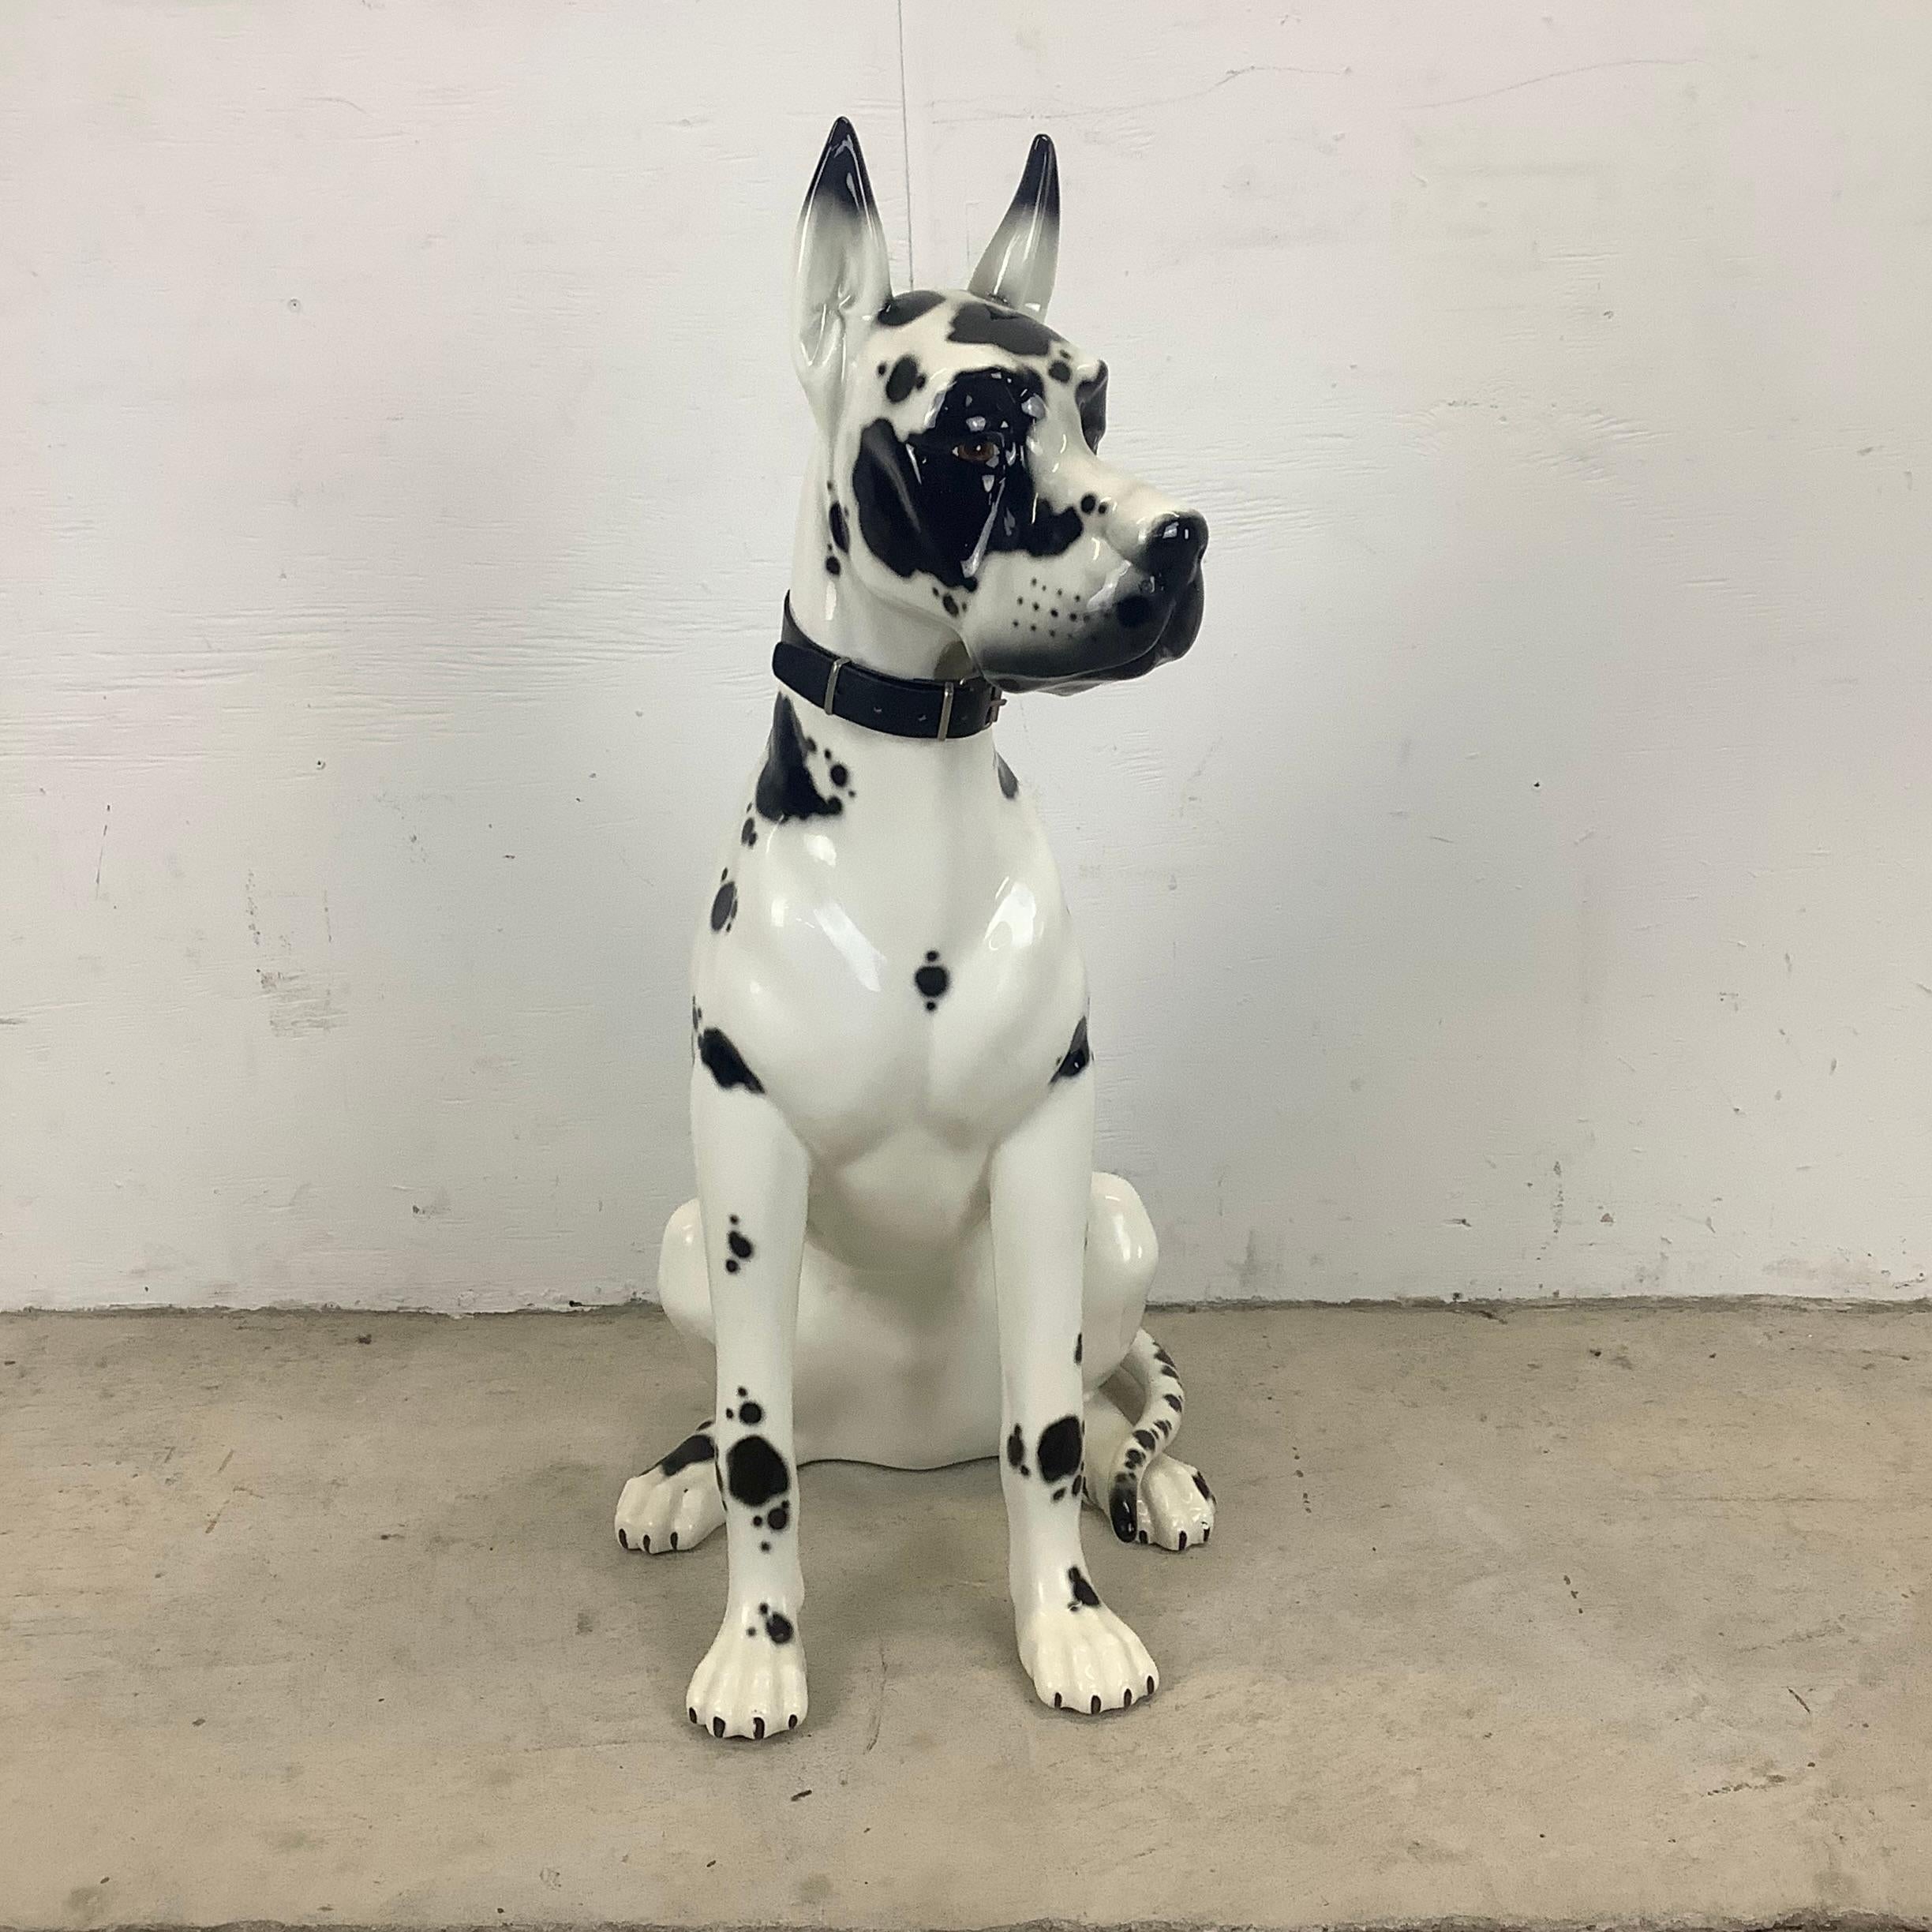 This impressive vintage modern Harlequin Great Dane ceramic dog statue stands thirty-one inches tall with beautiful hand-painted coat, vinyl collar, and wonderful attention to details. This beautiful black and white spotted Great Dane dog statue